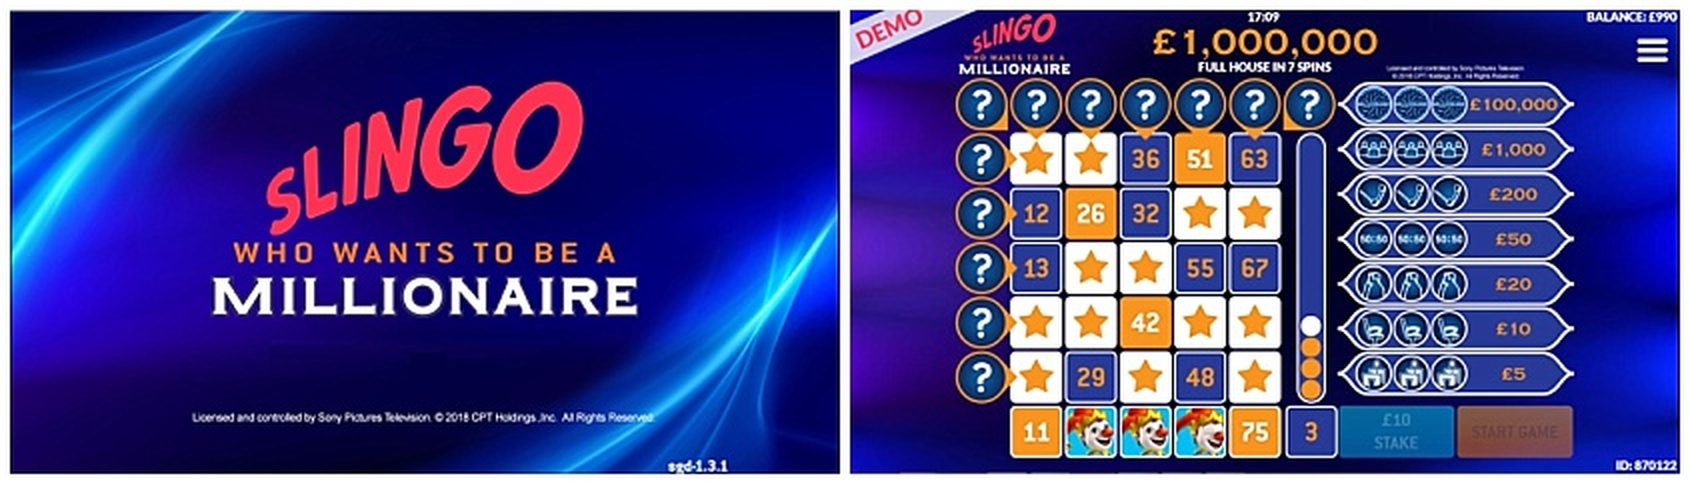 The Slingo Who Wants to be a Millionaire Online Slot Demo Game by Slingo